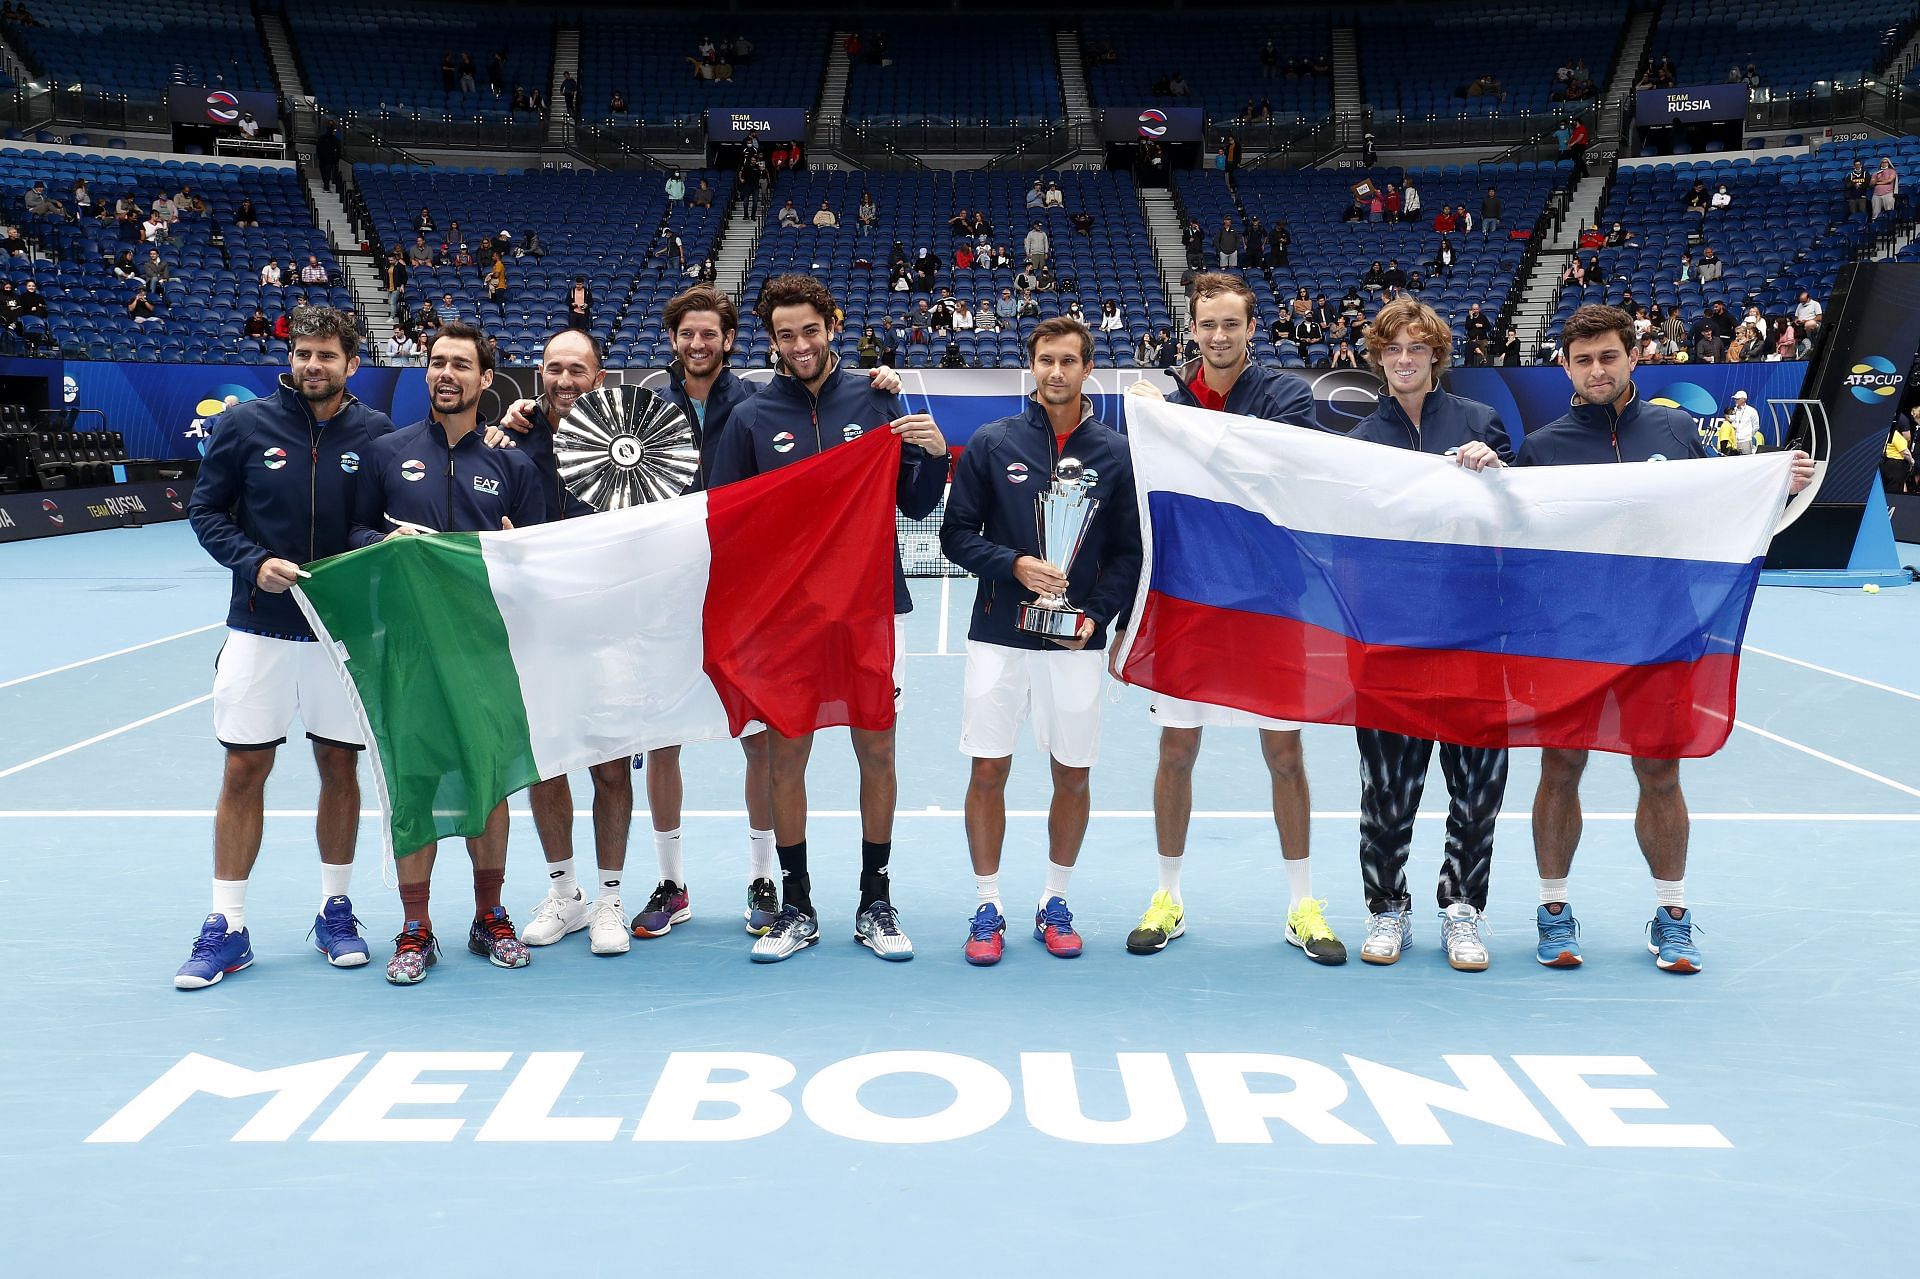 The 2021 ATP Cup finalists play each other in the group stage this year